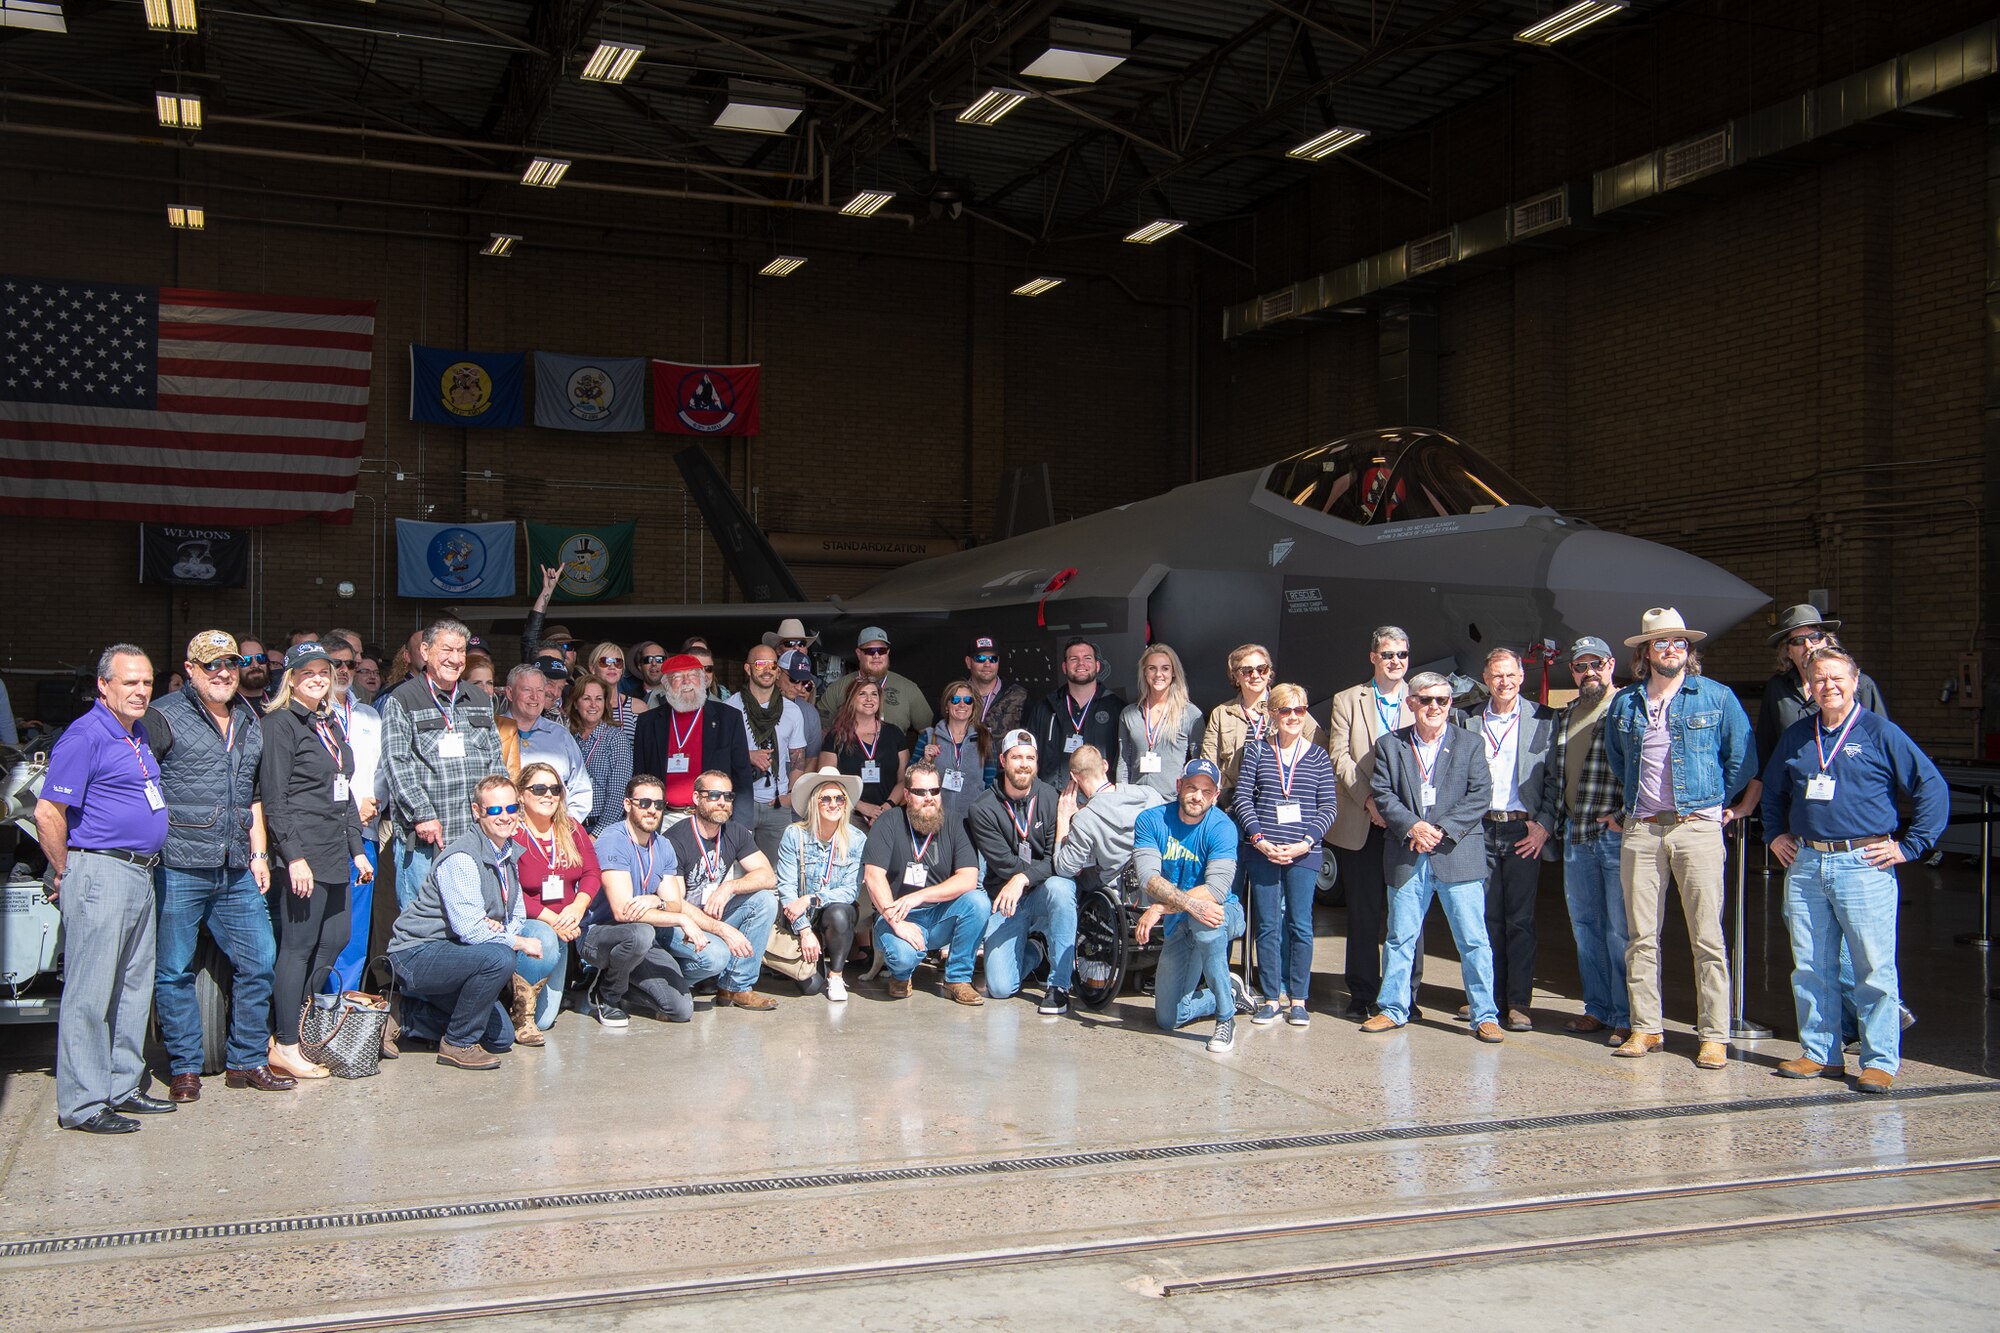 Members of the Airpower Foundation pose for a group photo in front of an F-35A Lightning II, March 8, 2019 at Luke Air Force Base, Ariz.